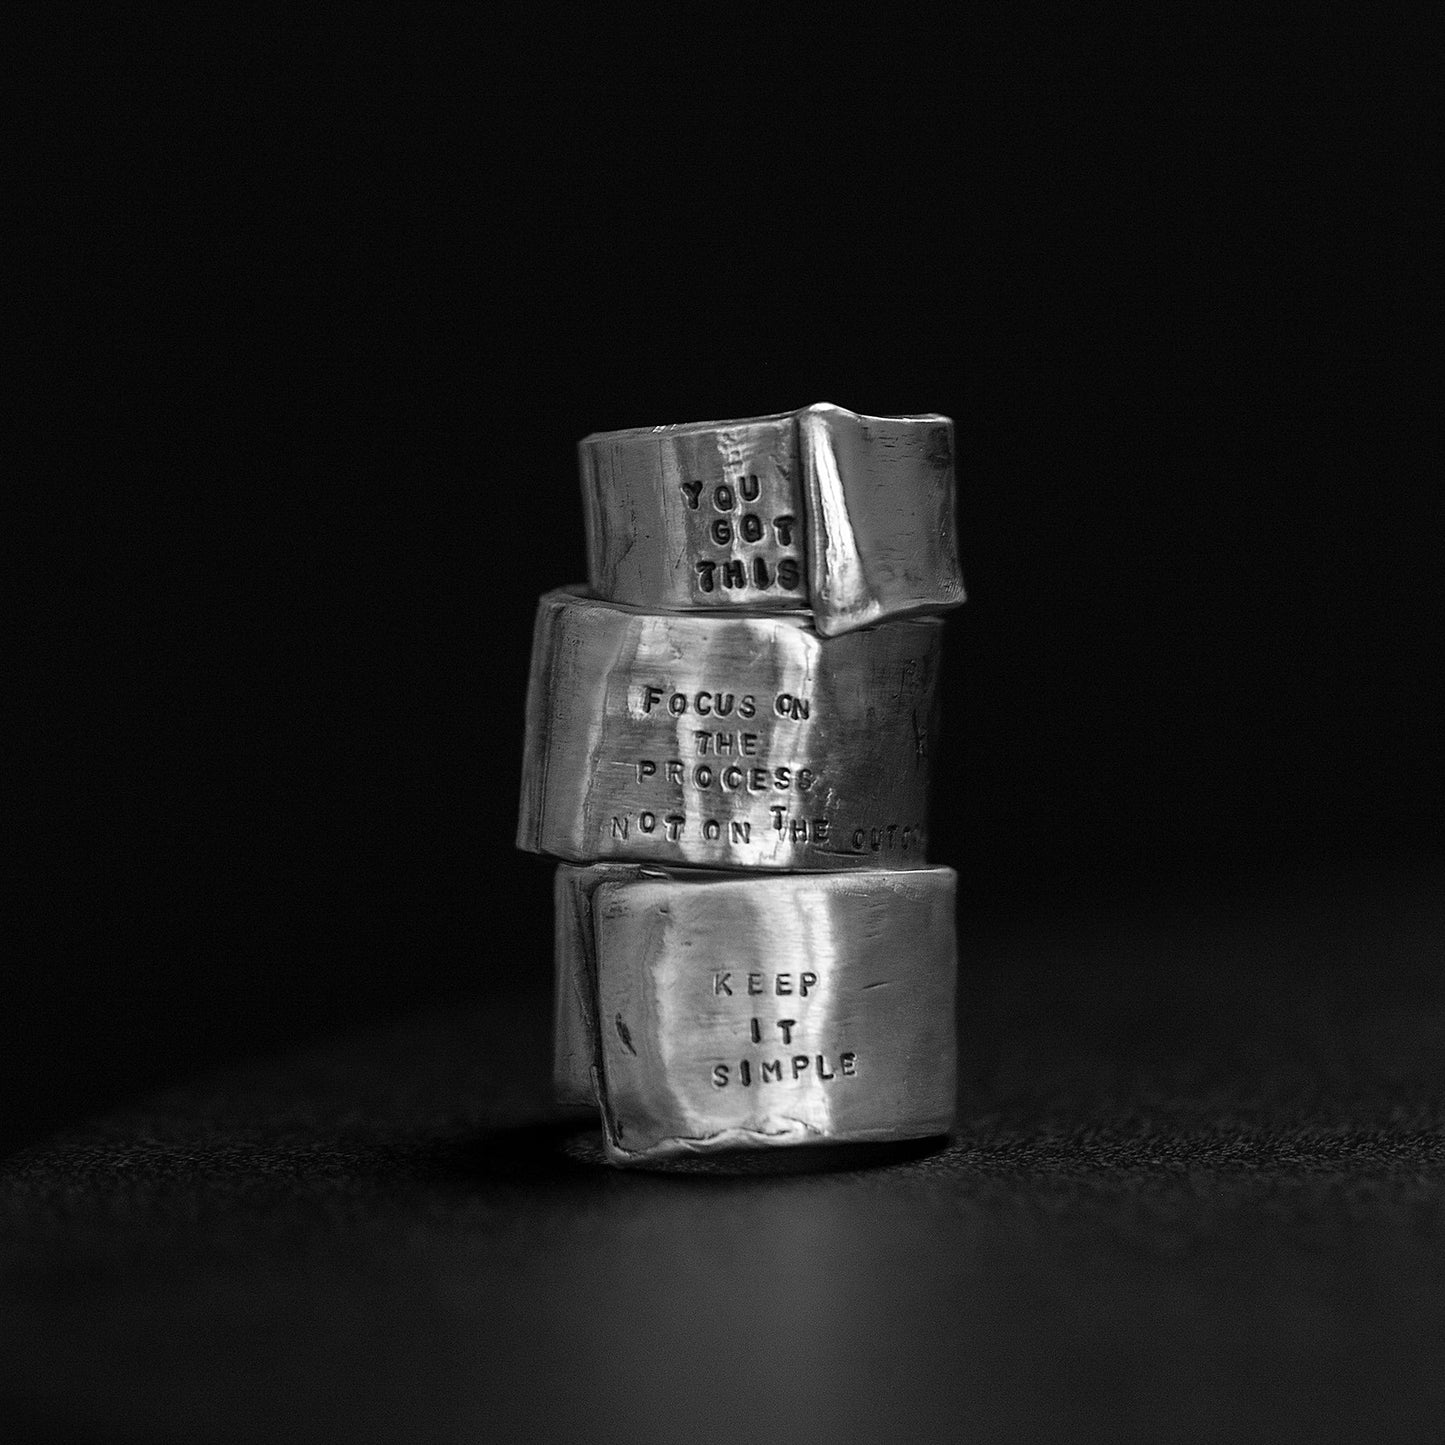 Rustic textured Sterling Silver Ring with Inspirational Message